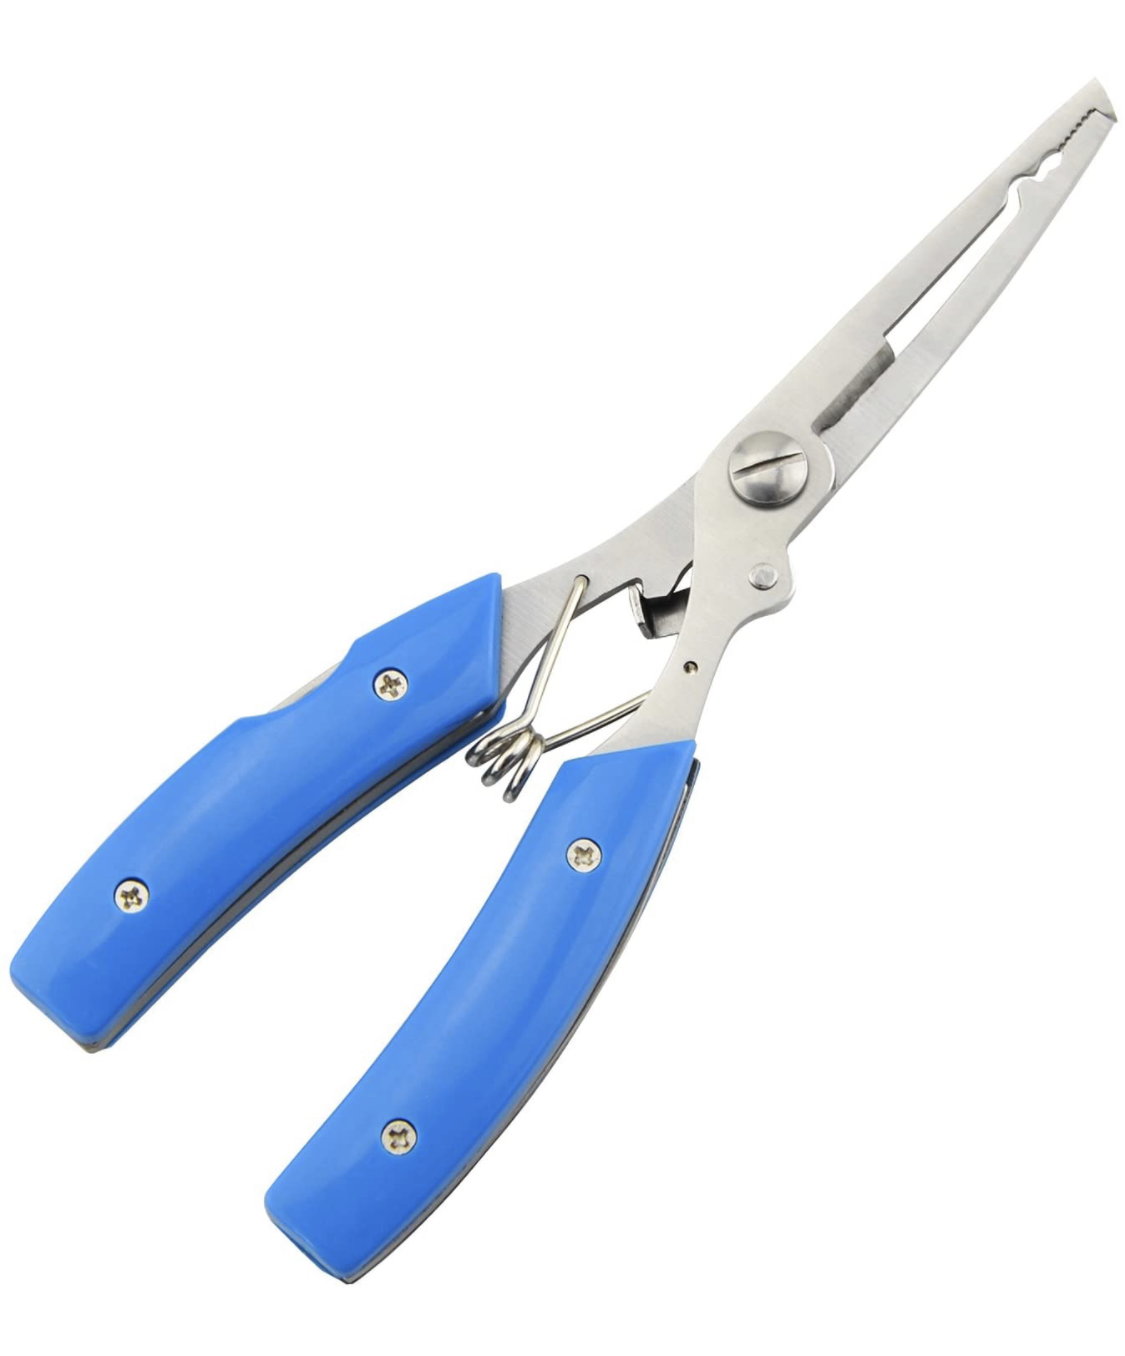 Buy CRAZY SHARK 6 Fishing Pliers, Stainless Steel Fishing Tools